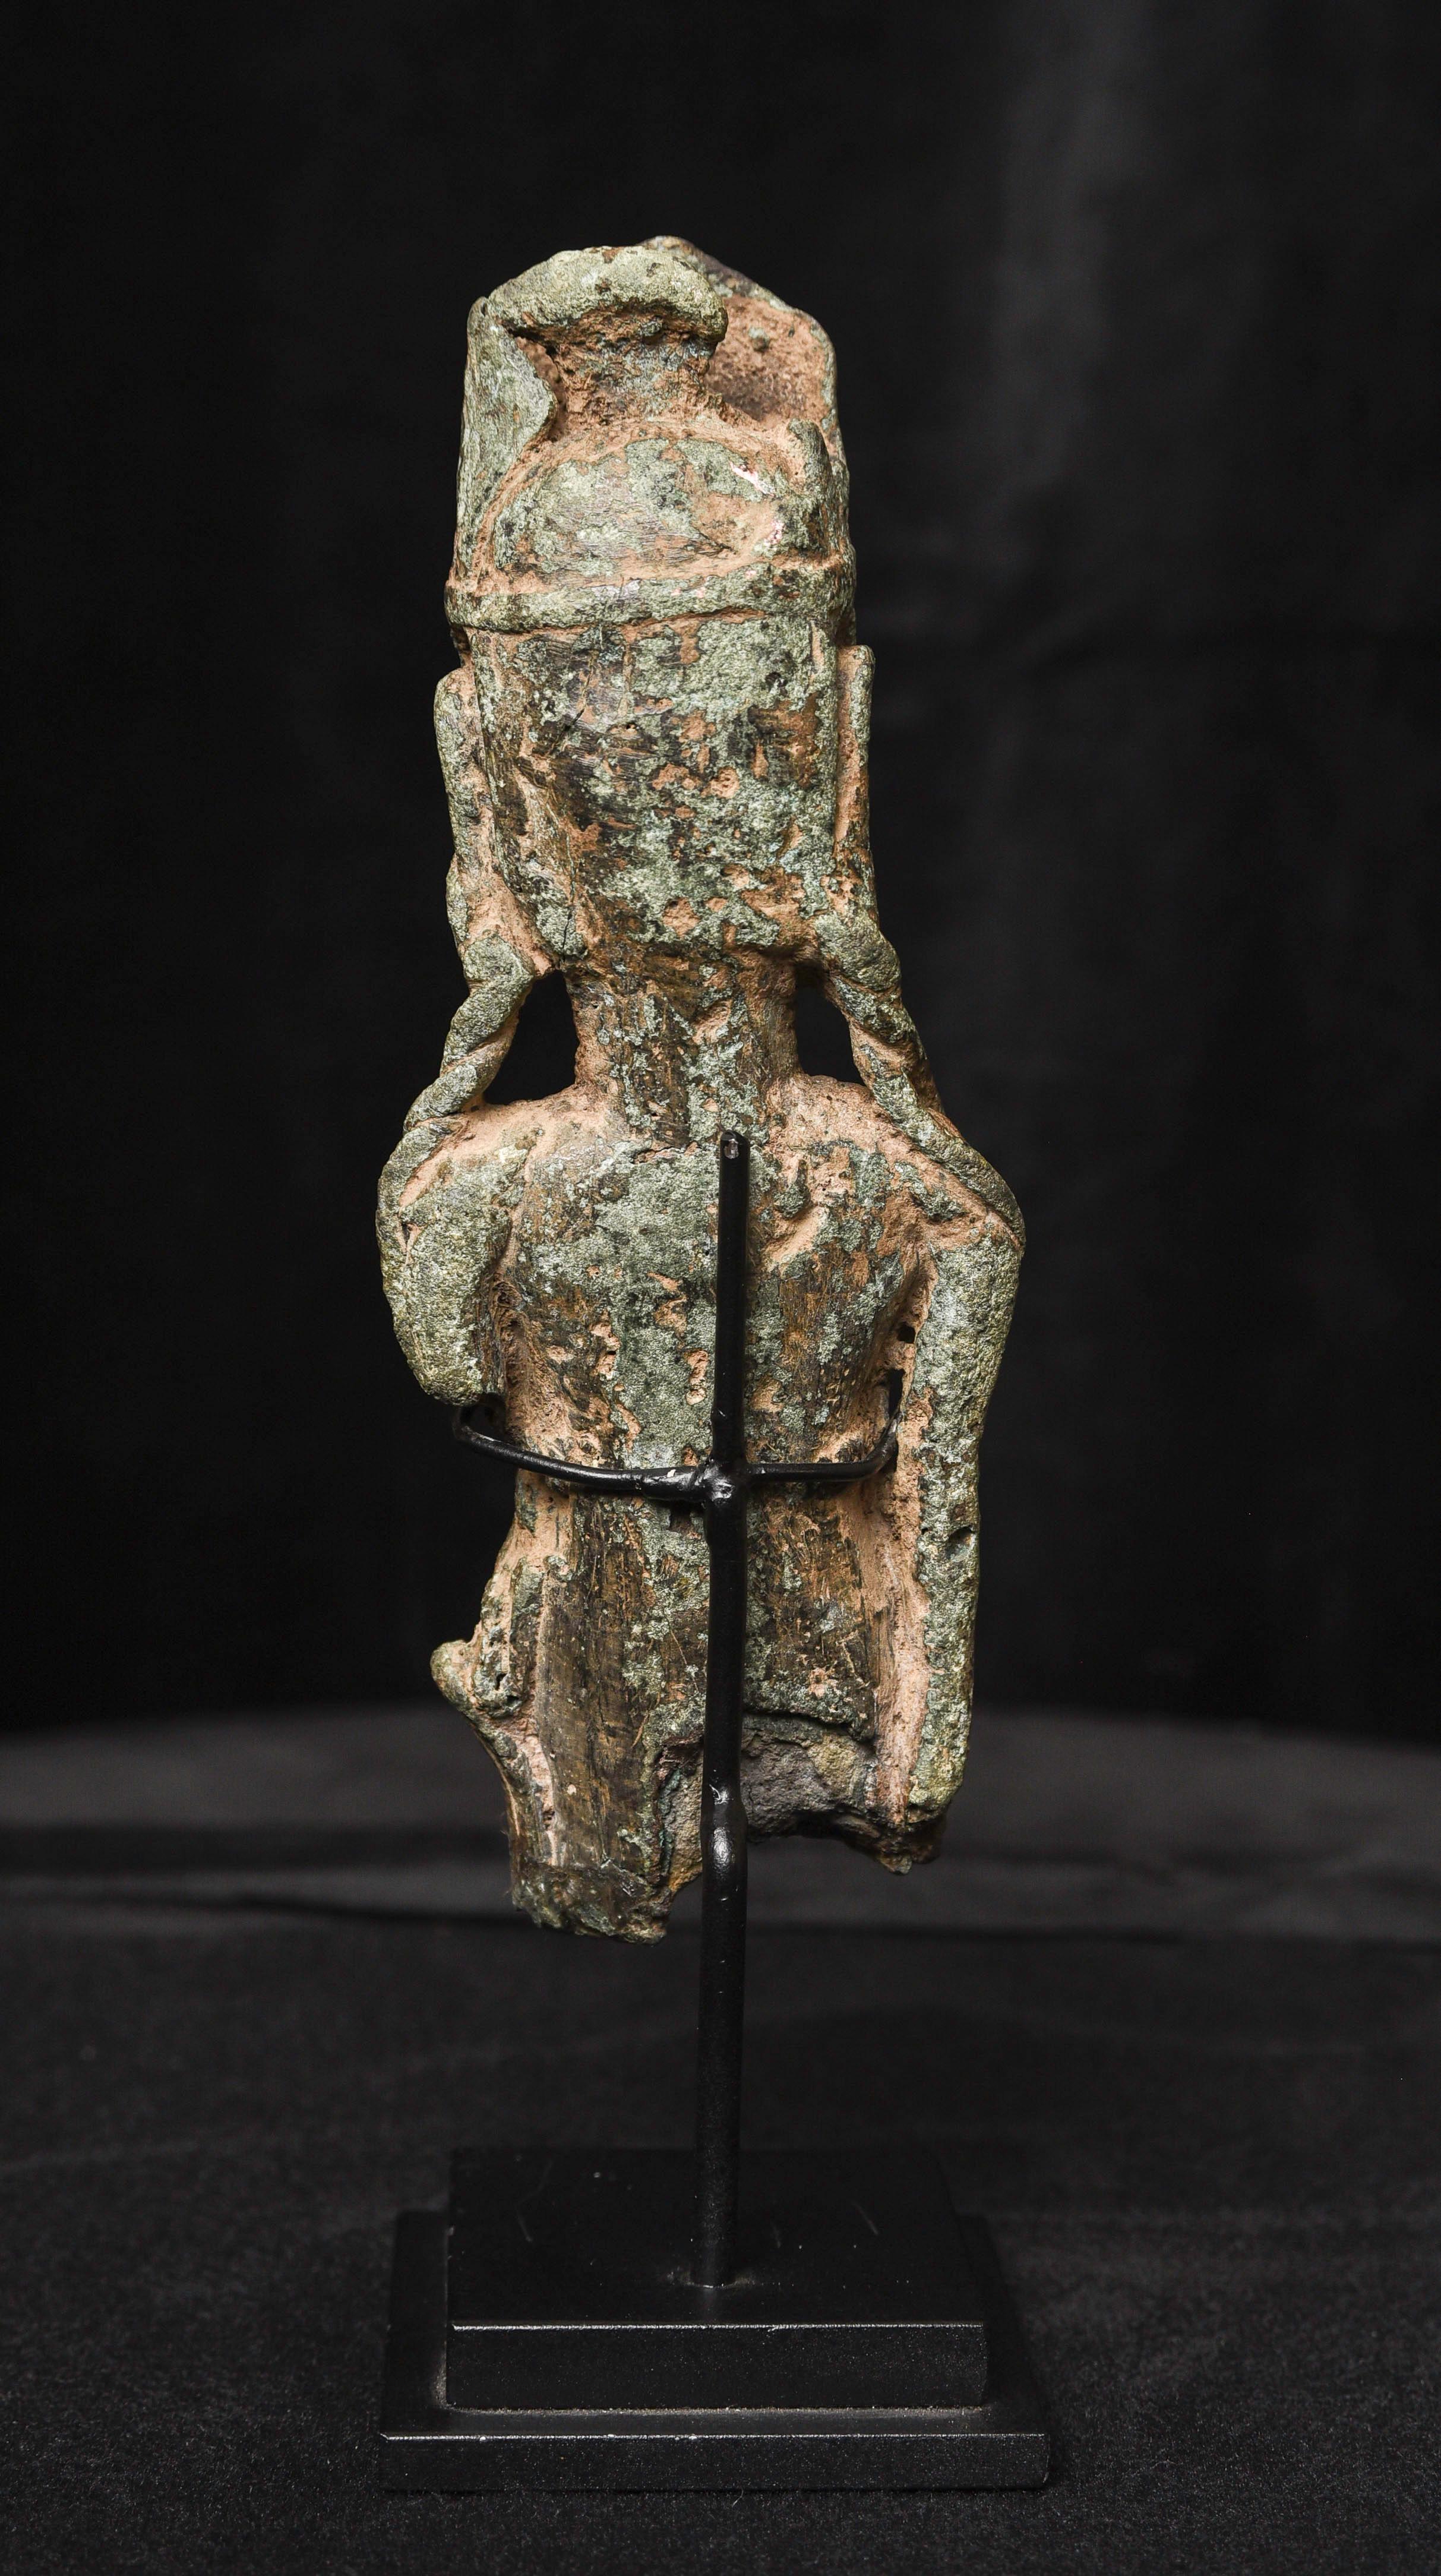 18th Century and Earlier Early Chinese/Silk Road, Bronze Buddha/Bodhisattva Bust-Possibly 10thC or e 9687 For Sale